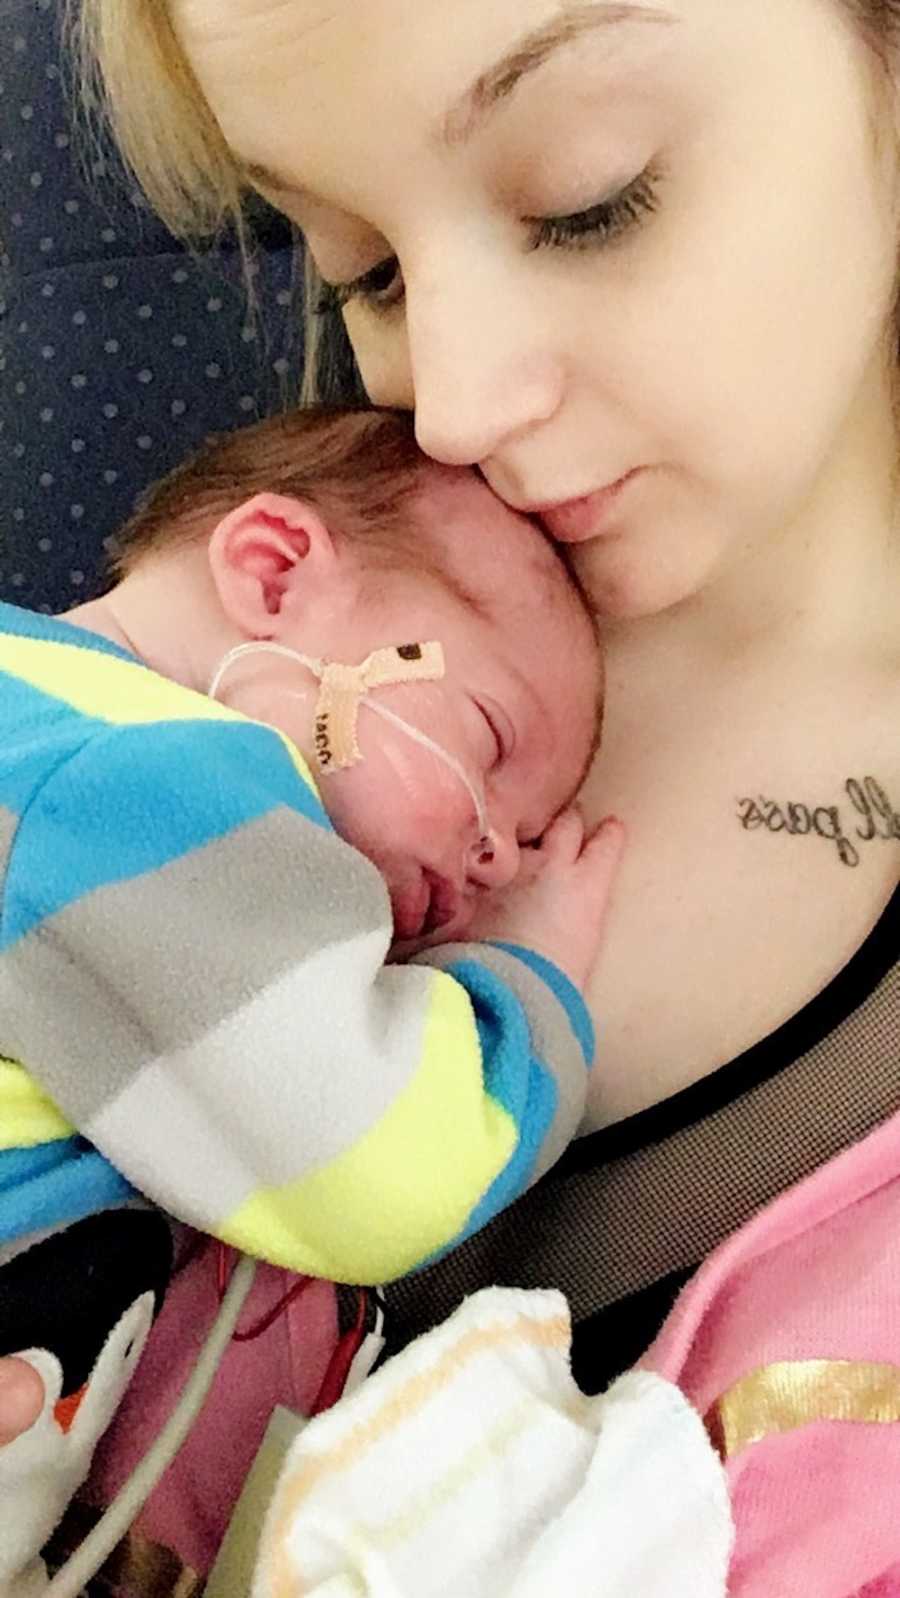 Mother looks down as newborn with Hirschsprung Disease lays asleep on her chest